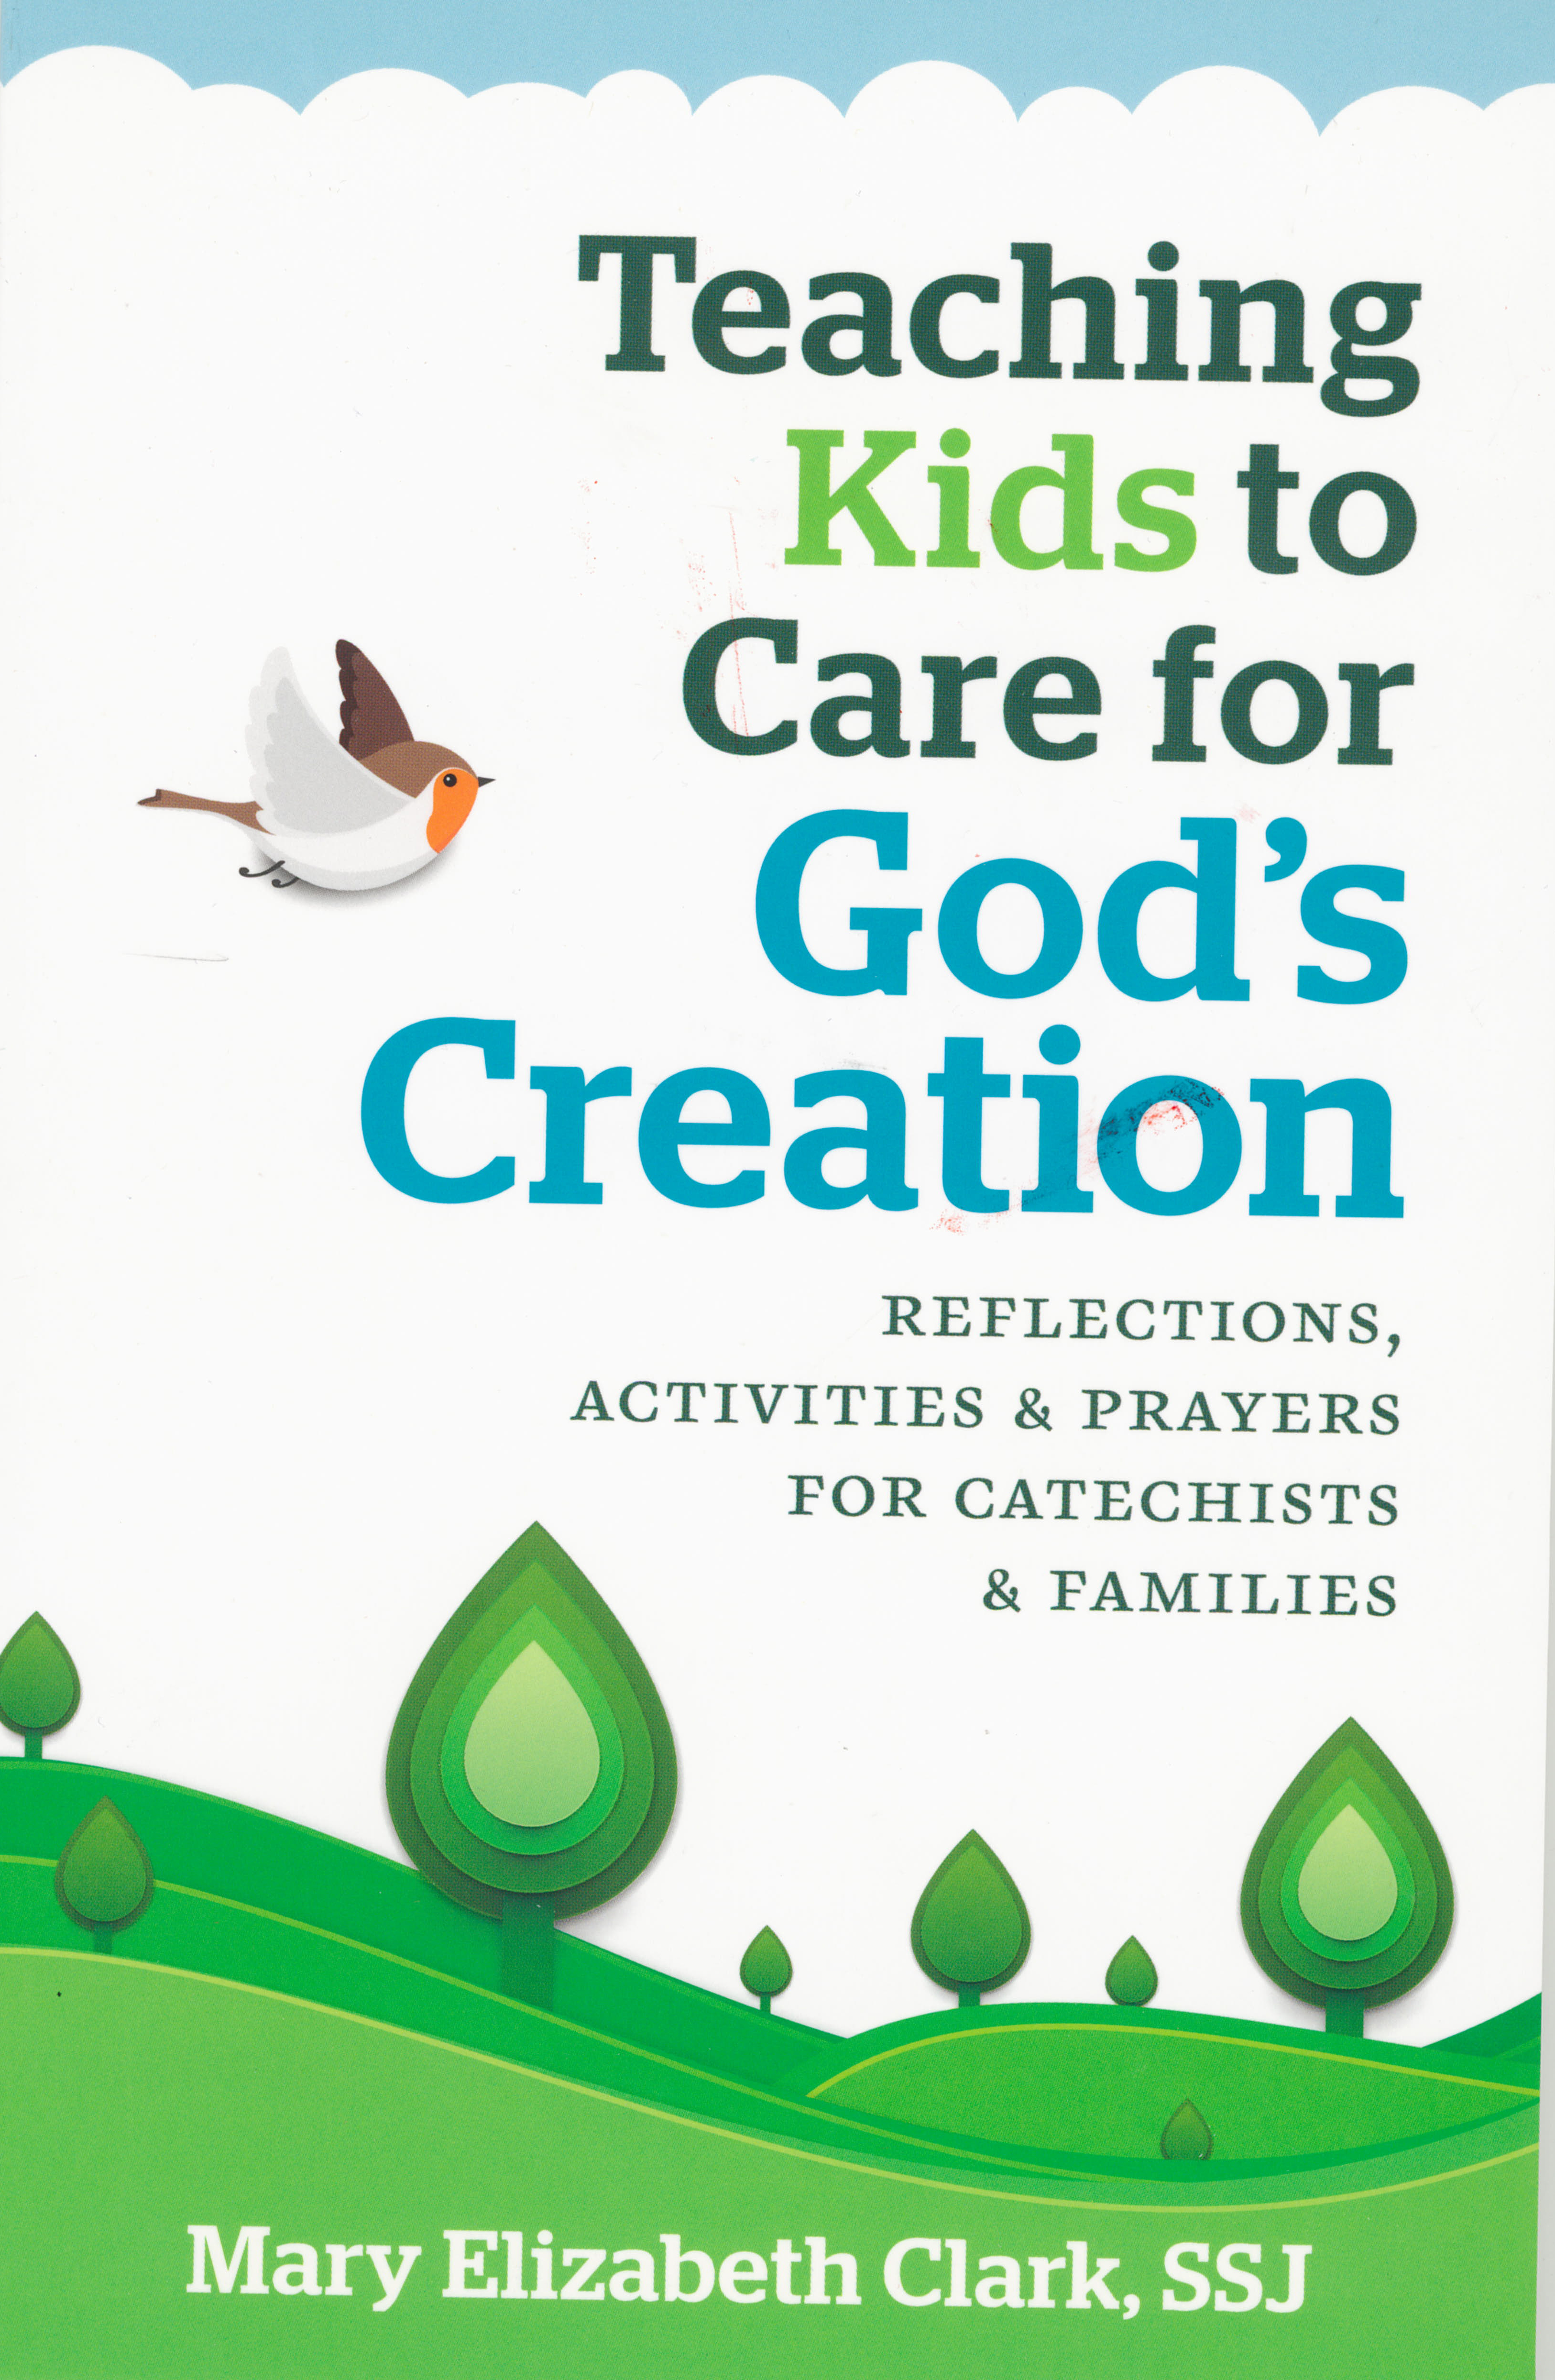 Teaching Kids to Care for God's Creation by Mary Elizabeth Clark, SSJ 108-9781627853408